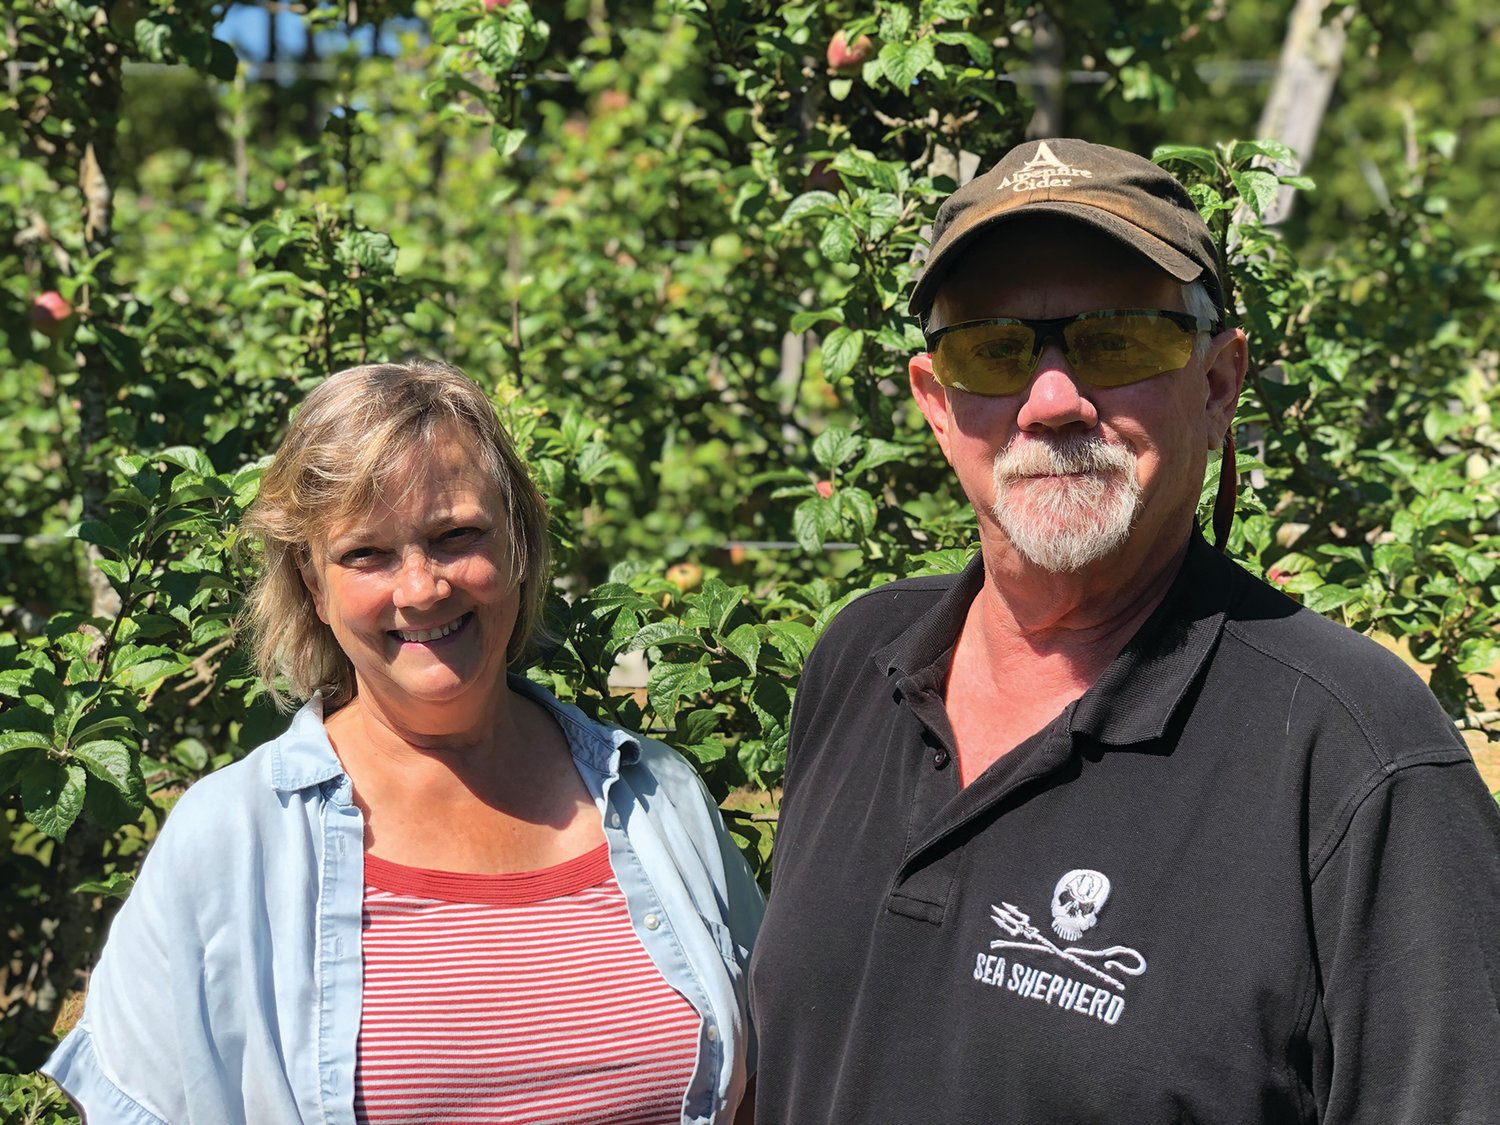 After earning certification from the Real Organic Project, Steve “Bear” and Nancy Bishop stand ready to usher in a new era of environmental stewardship and activism at Port Townsend’s Alpenfire Cider.